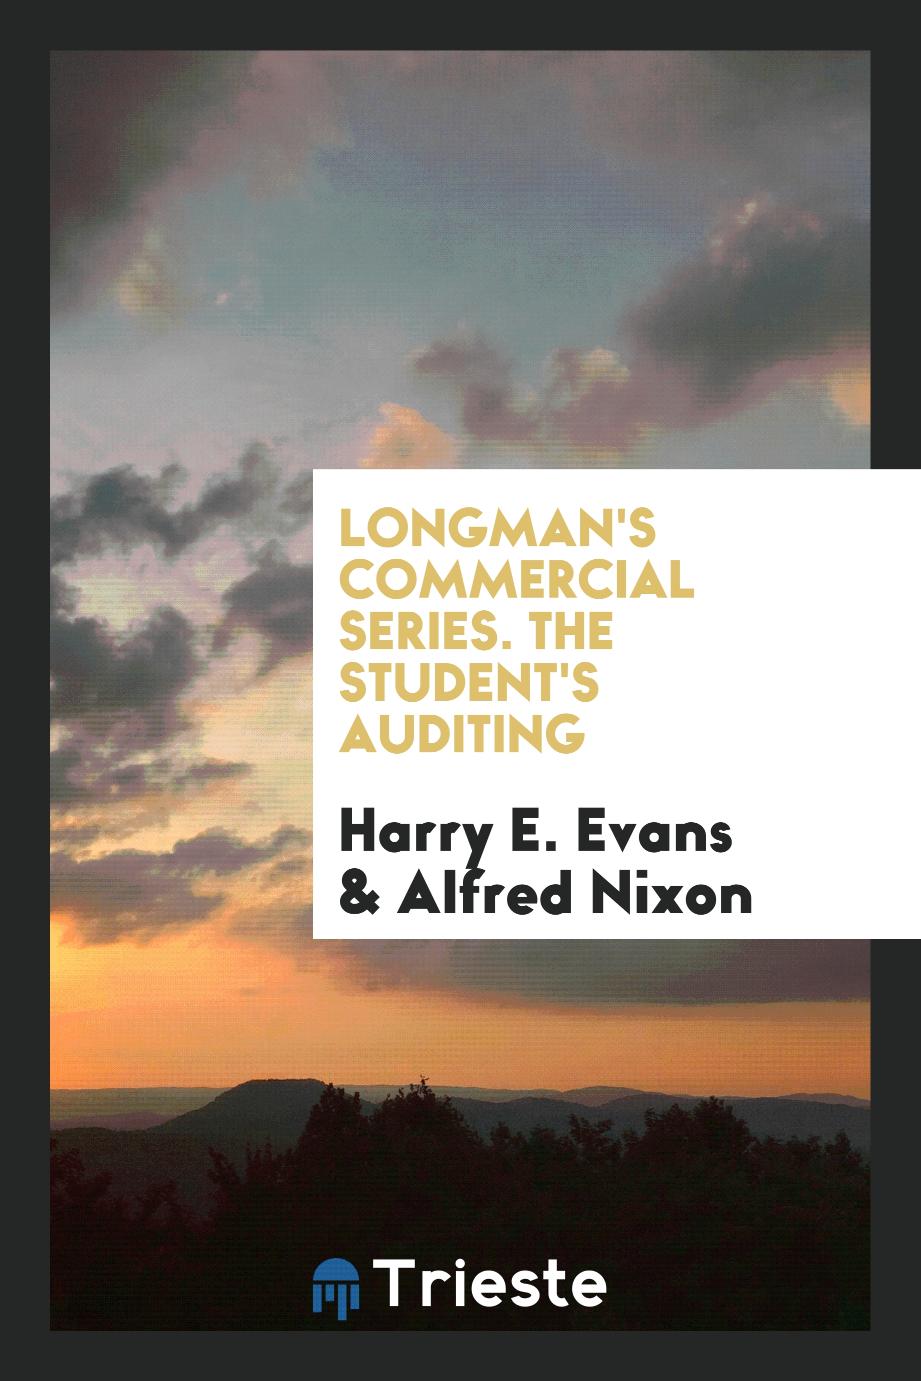 Longman's Commercial Series. The Student's Auditing